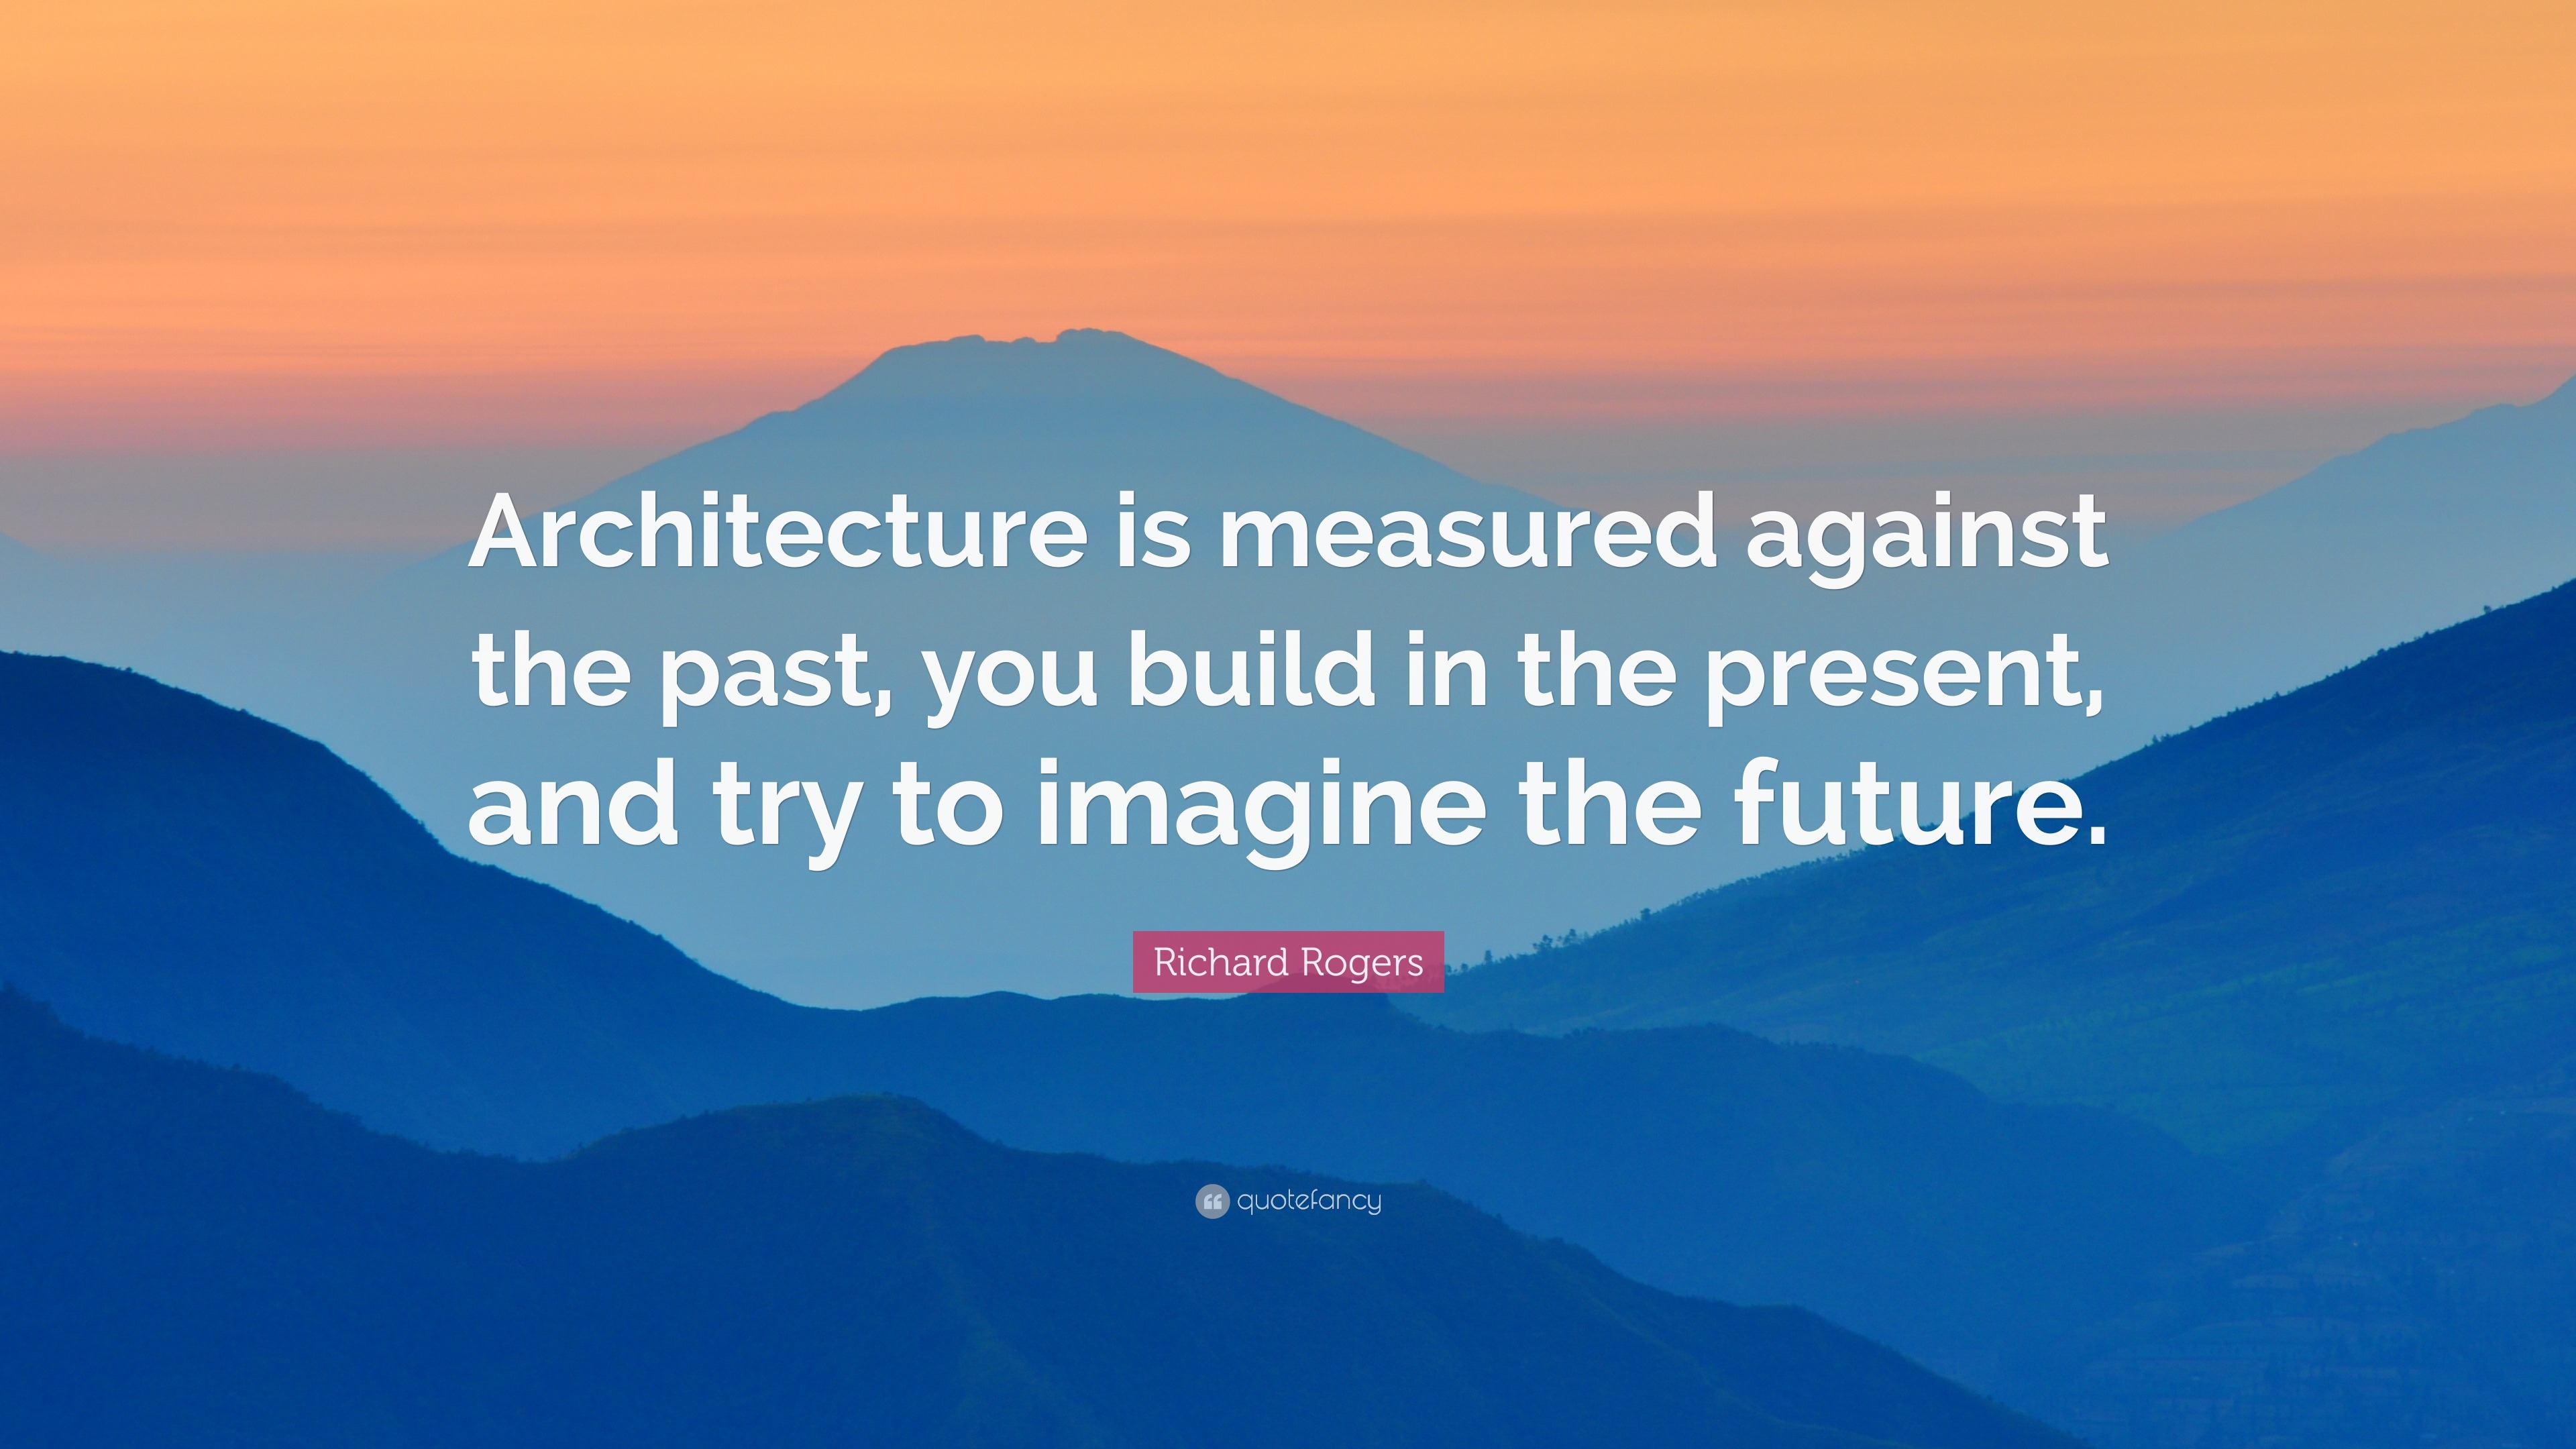 Richard Rogers Quote: “Architecture is measured against the past, you ...